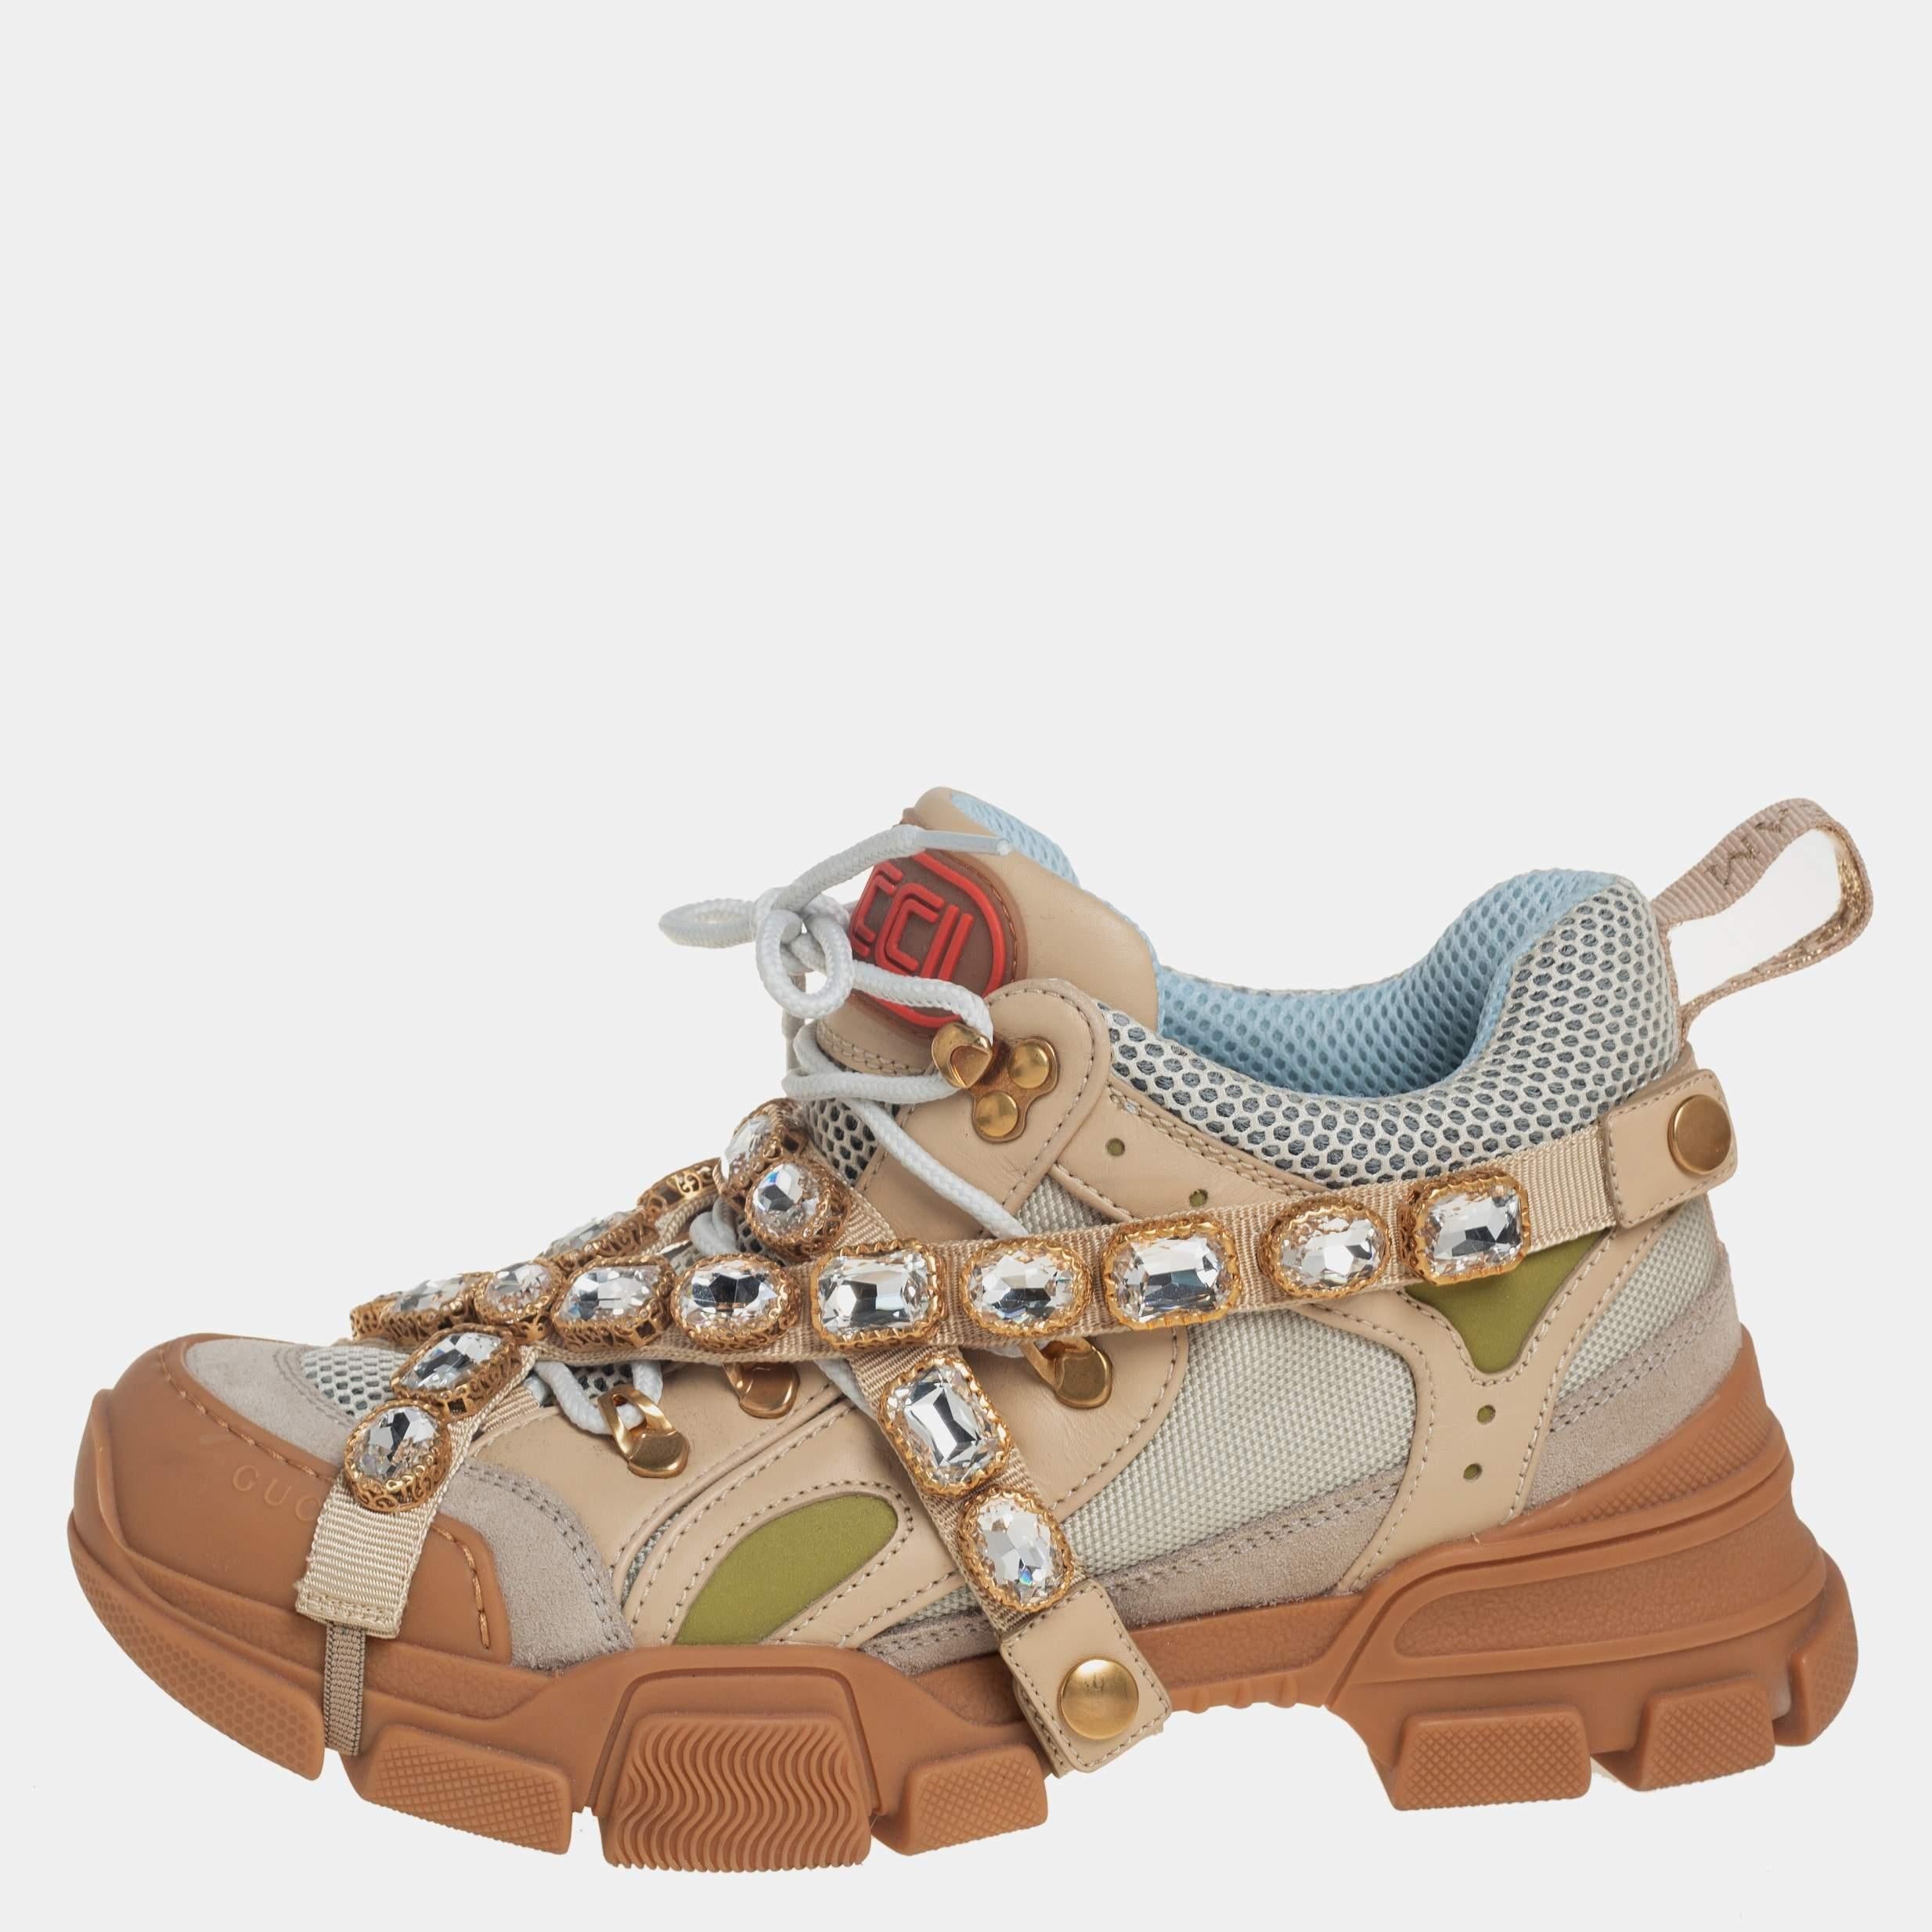 Inspired by hiking, the Gucci Flashtrek sneakers are a stylish take on the chunky shoe trend. Mounted atop a thick sole, these kicks are constructed from leather and mesh and accented with the label’s SEGA-inspired logo on the tongues. These kicks